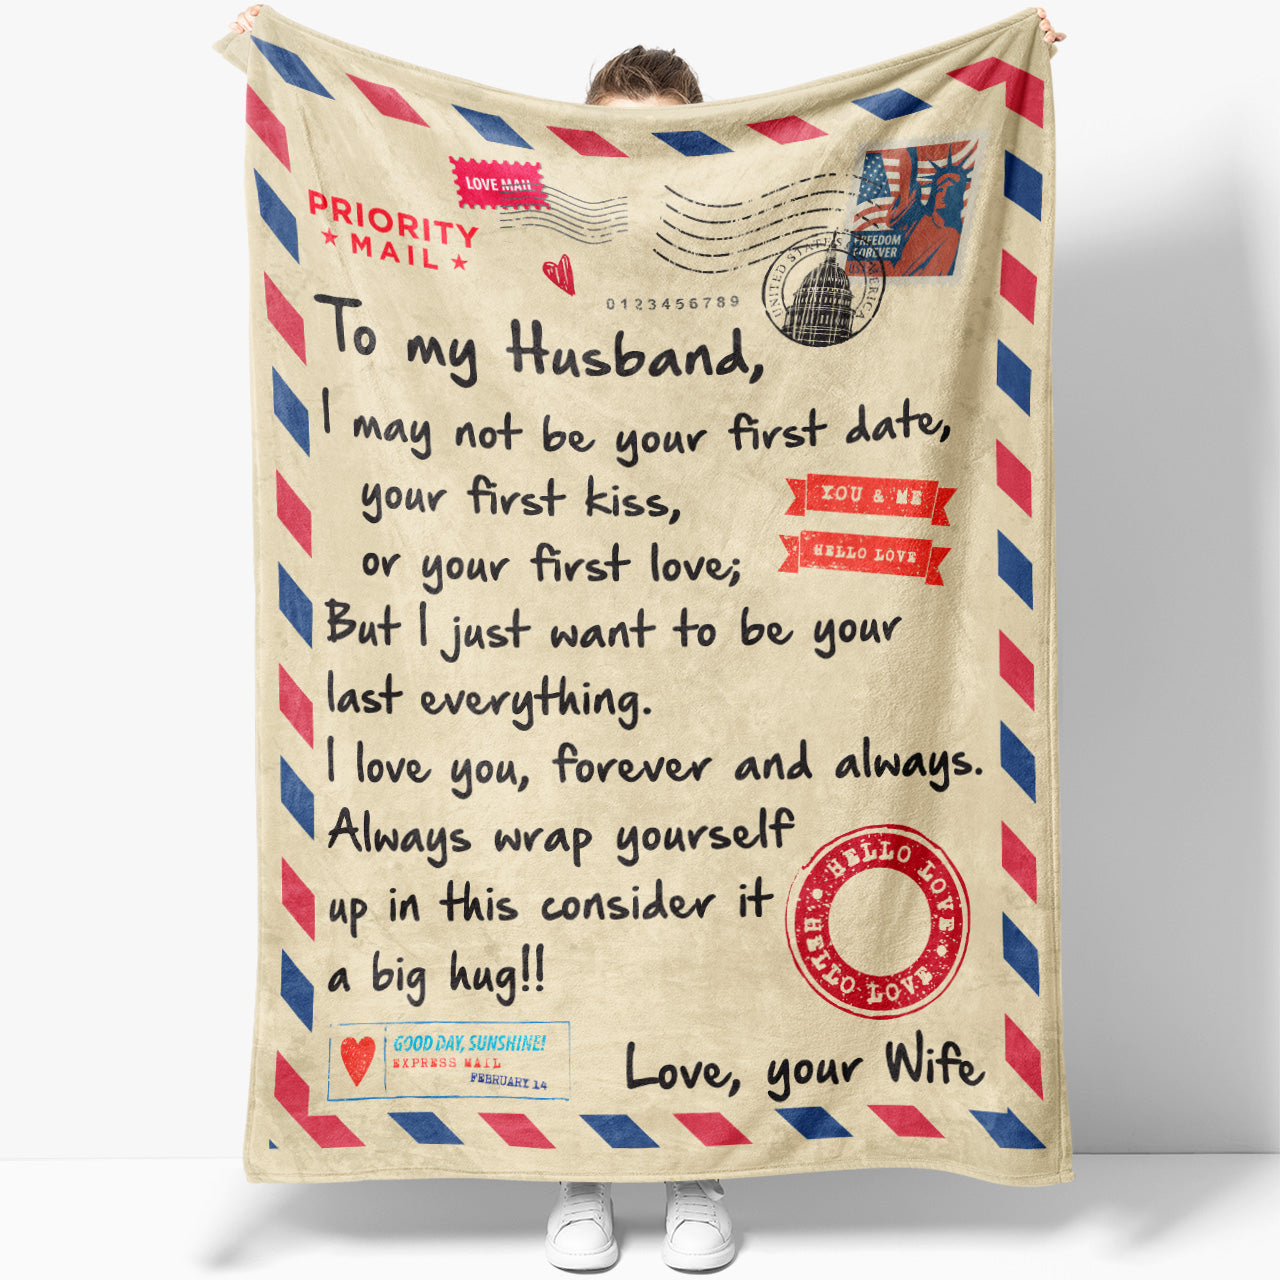 Blanket Gift For Husband, Best Gifts For Men, Best Gift For Husband, Your First Date